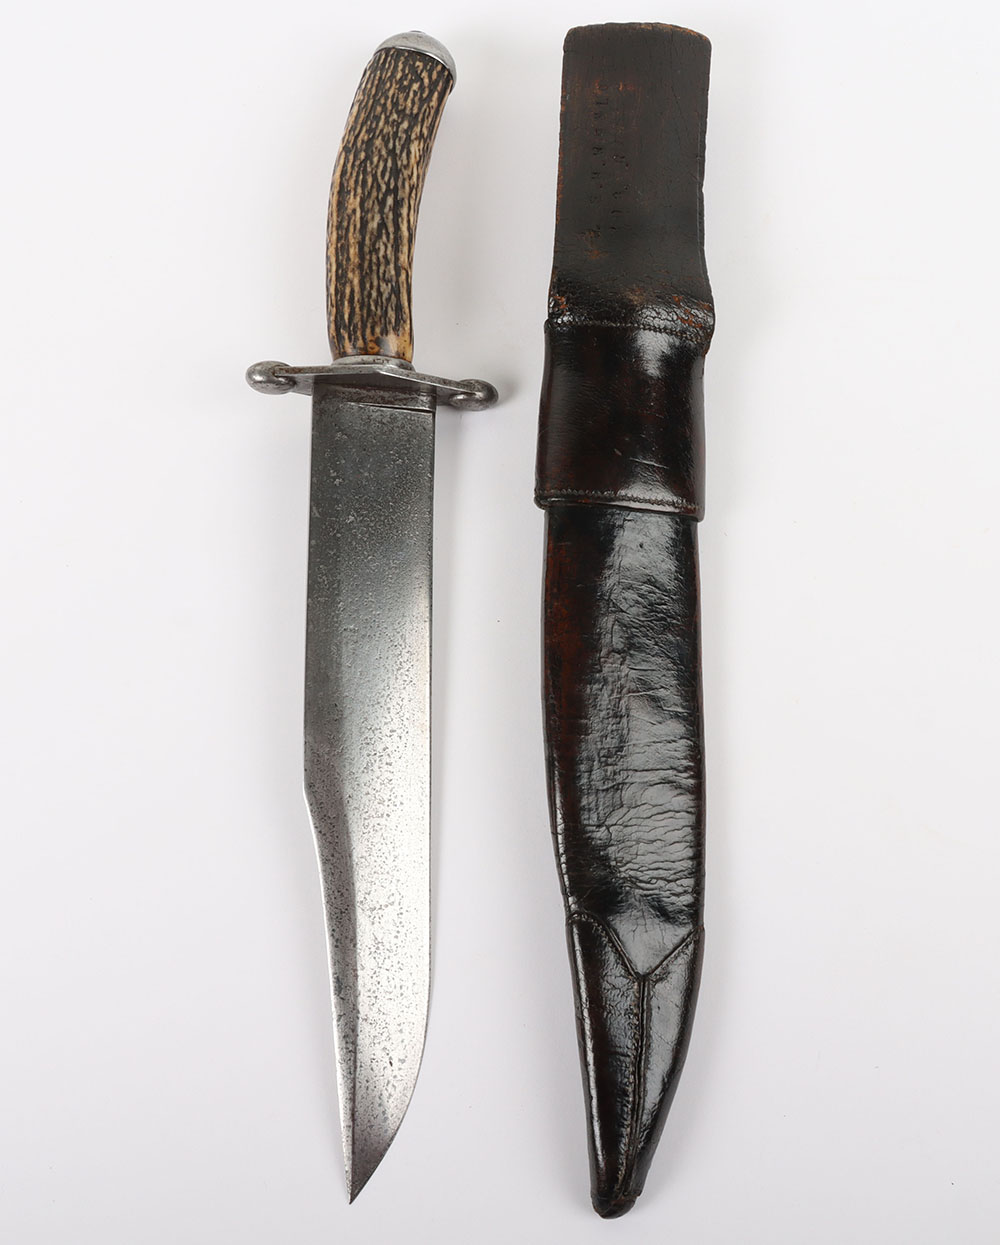 US CIVIL WAR BOWIE KNIFE, circa 1850 – 1860 - Image 2 of 5